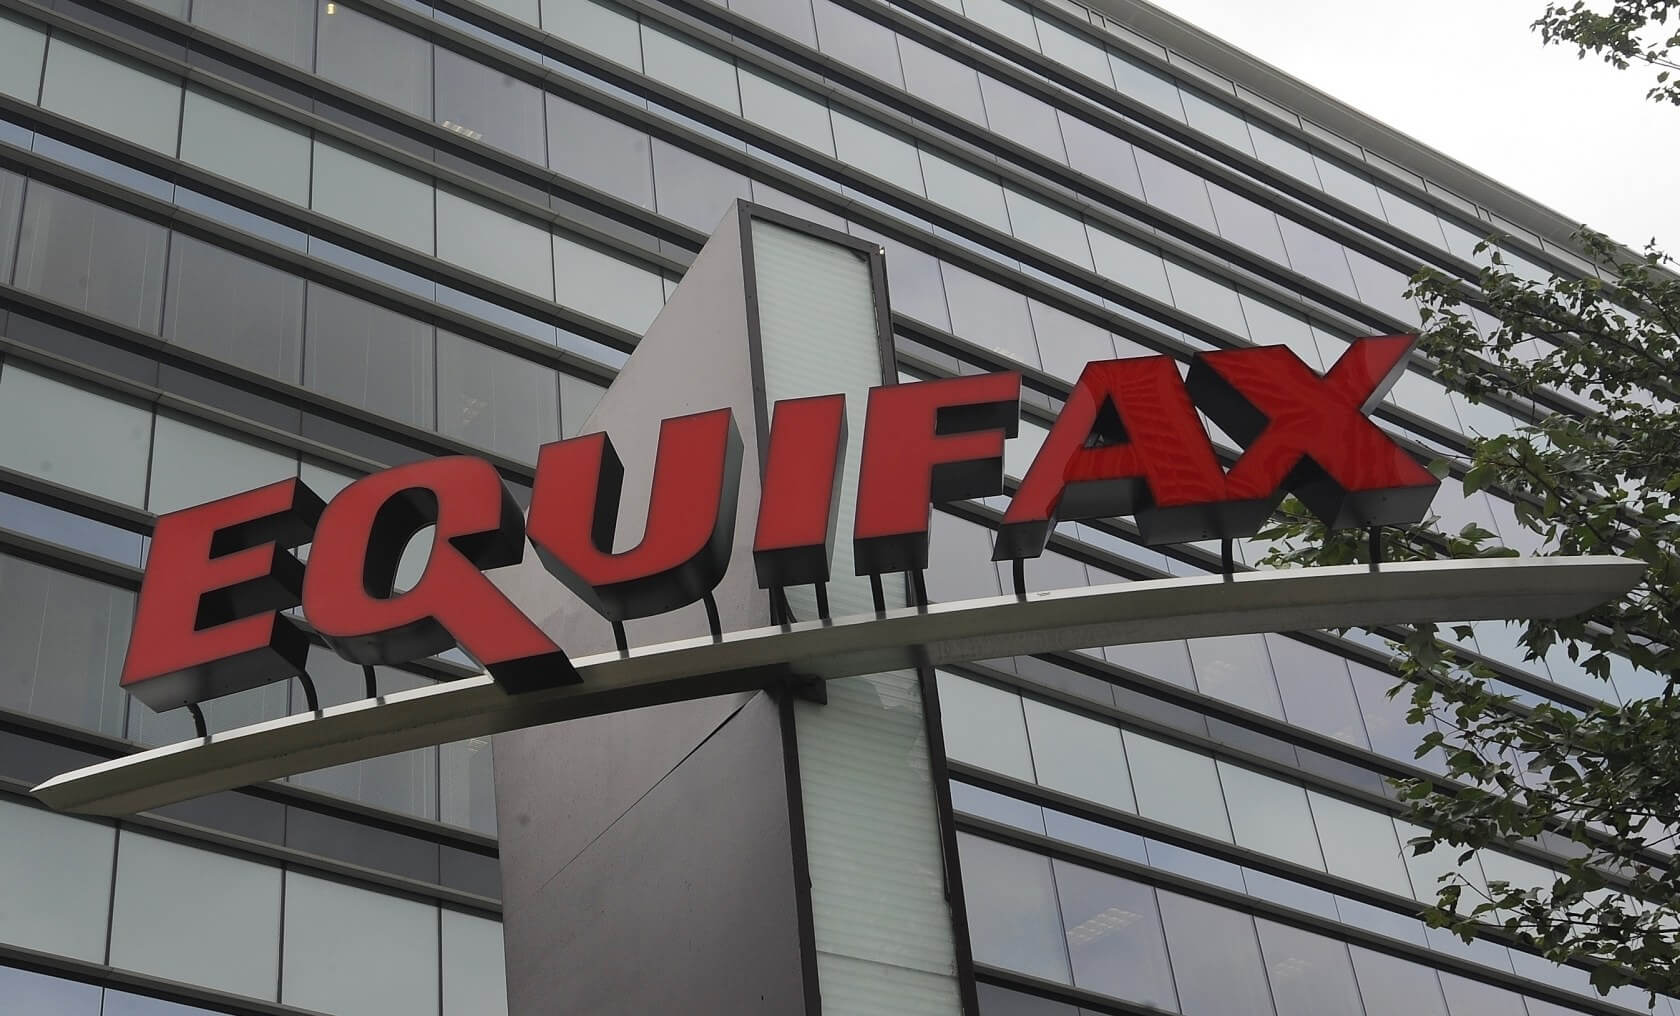 You can now file a claim for $125 in cash following Equifax breach settlement